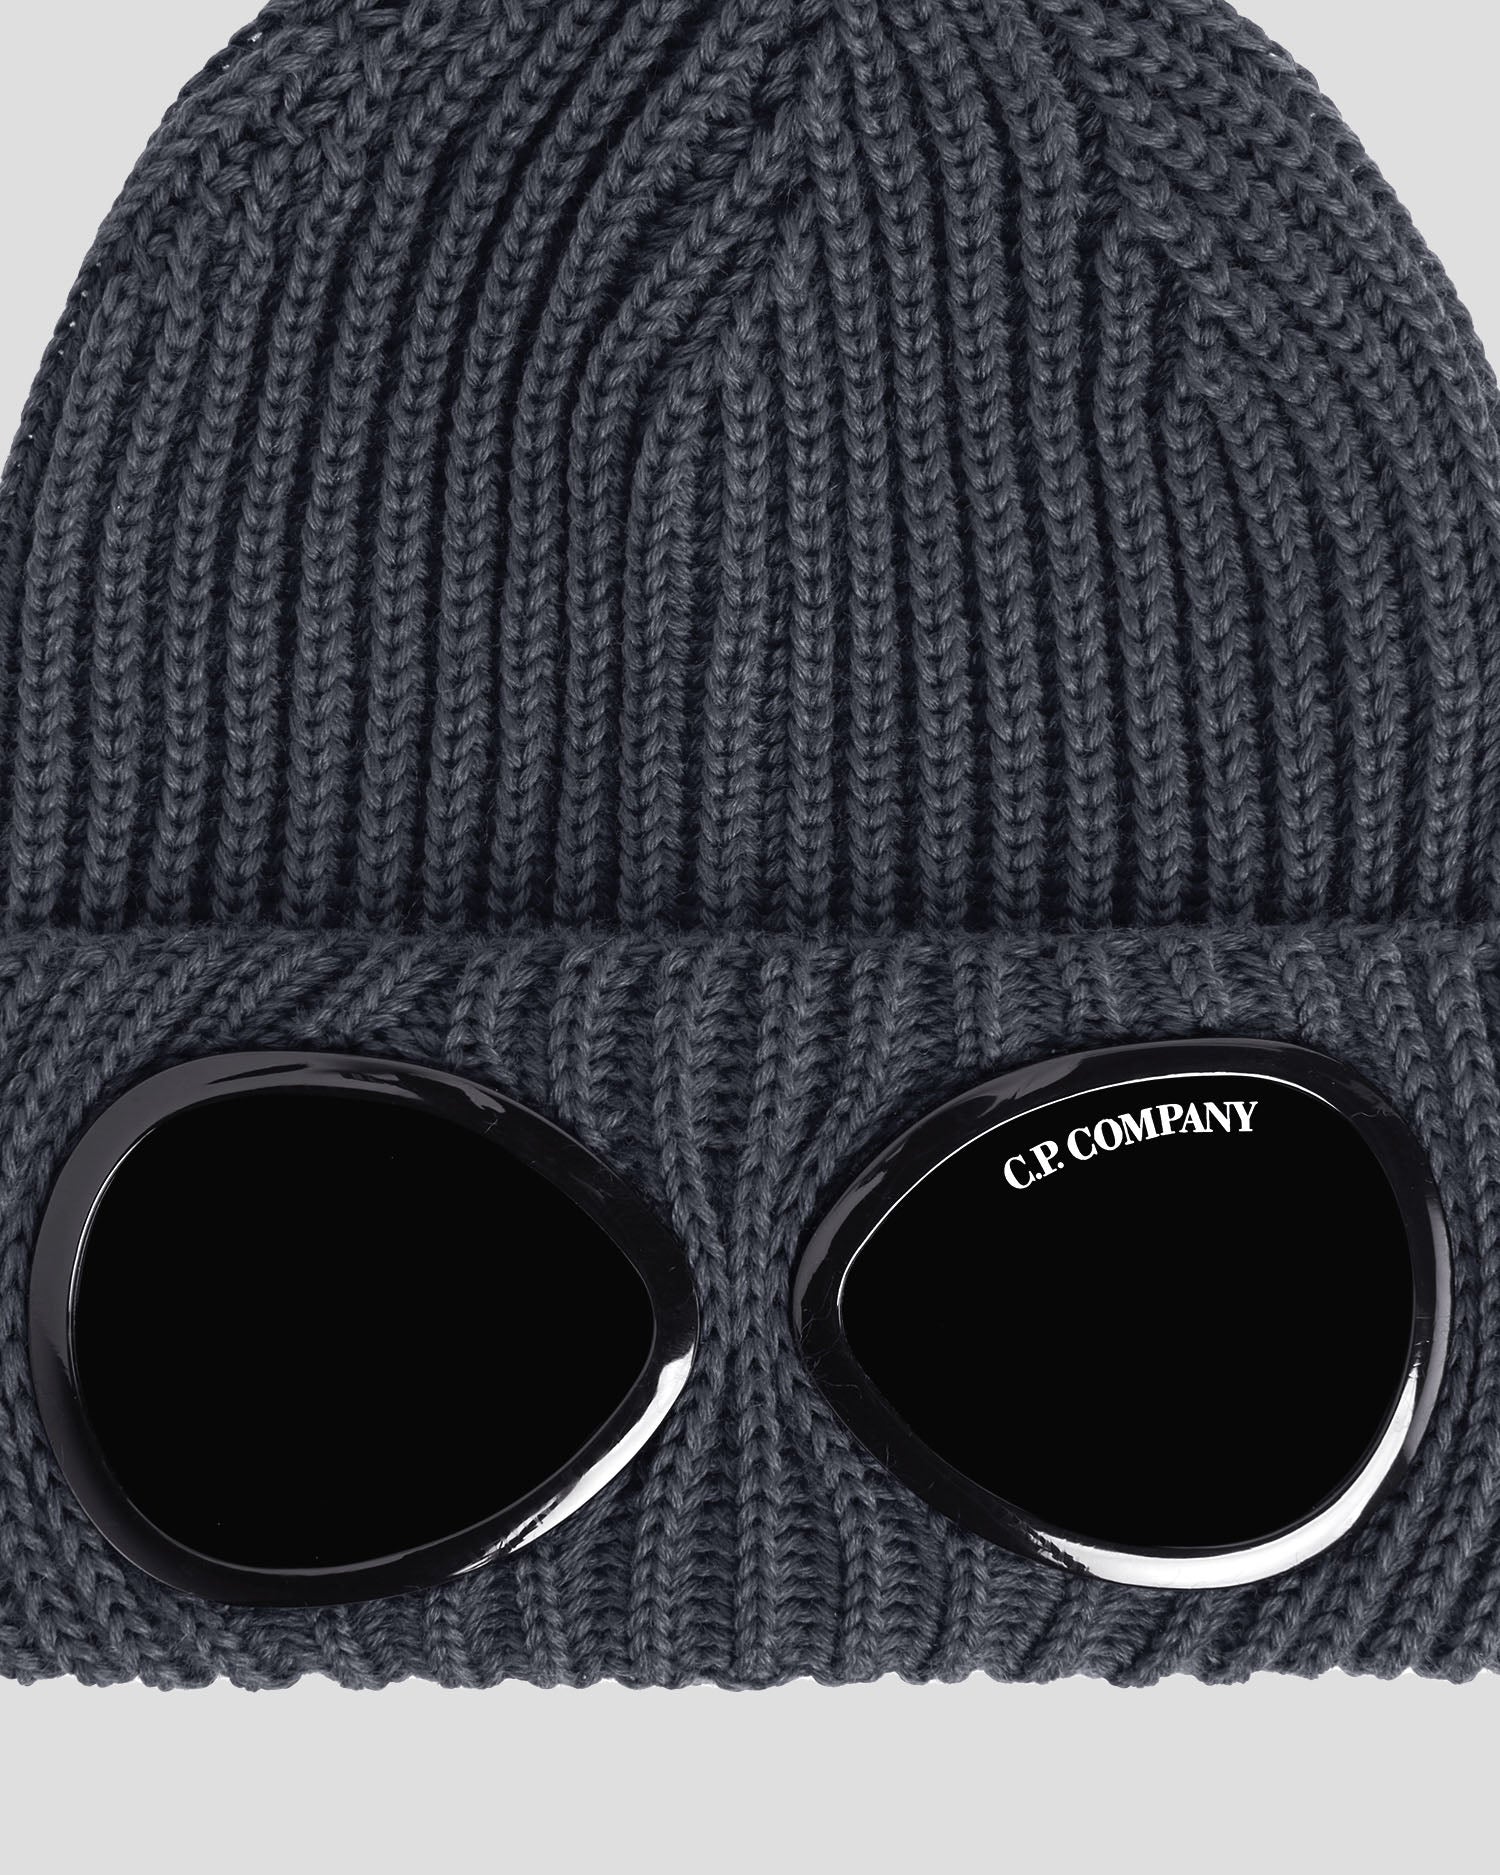 Extra Fine Merino Wool Goggle Beanie in Forged Iron